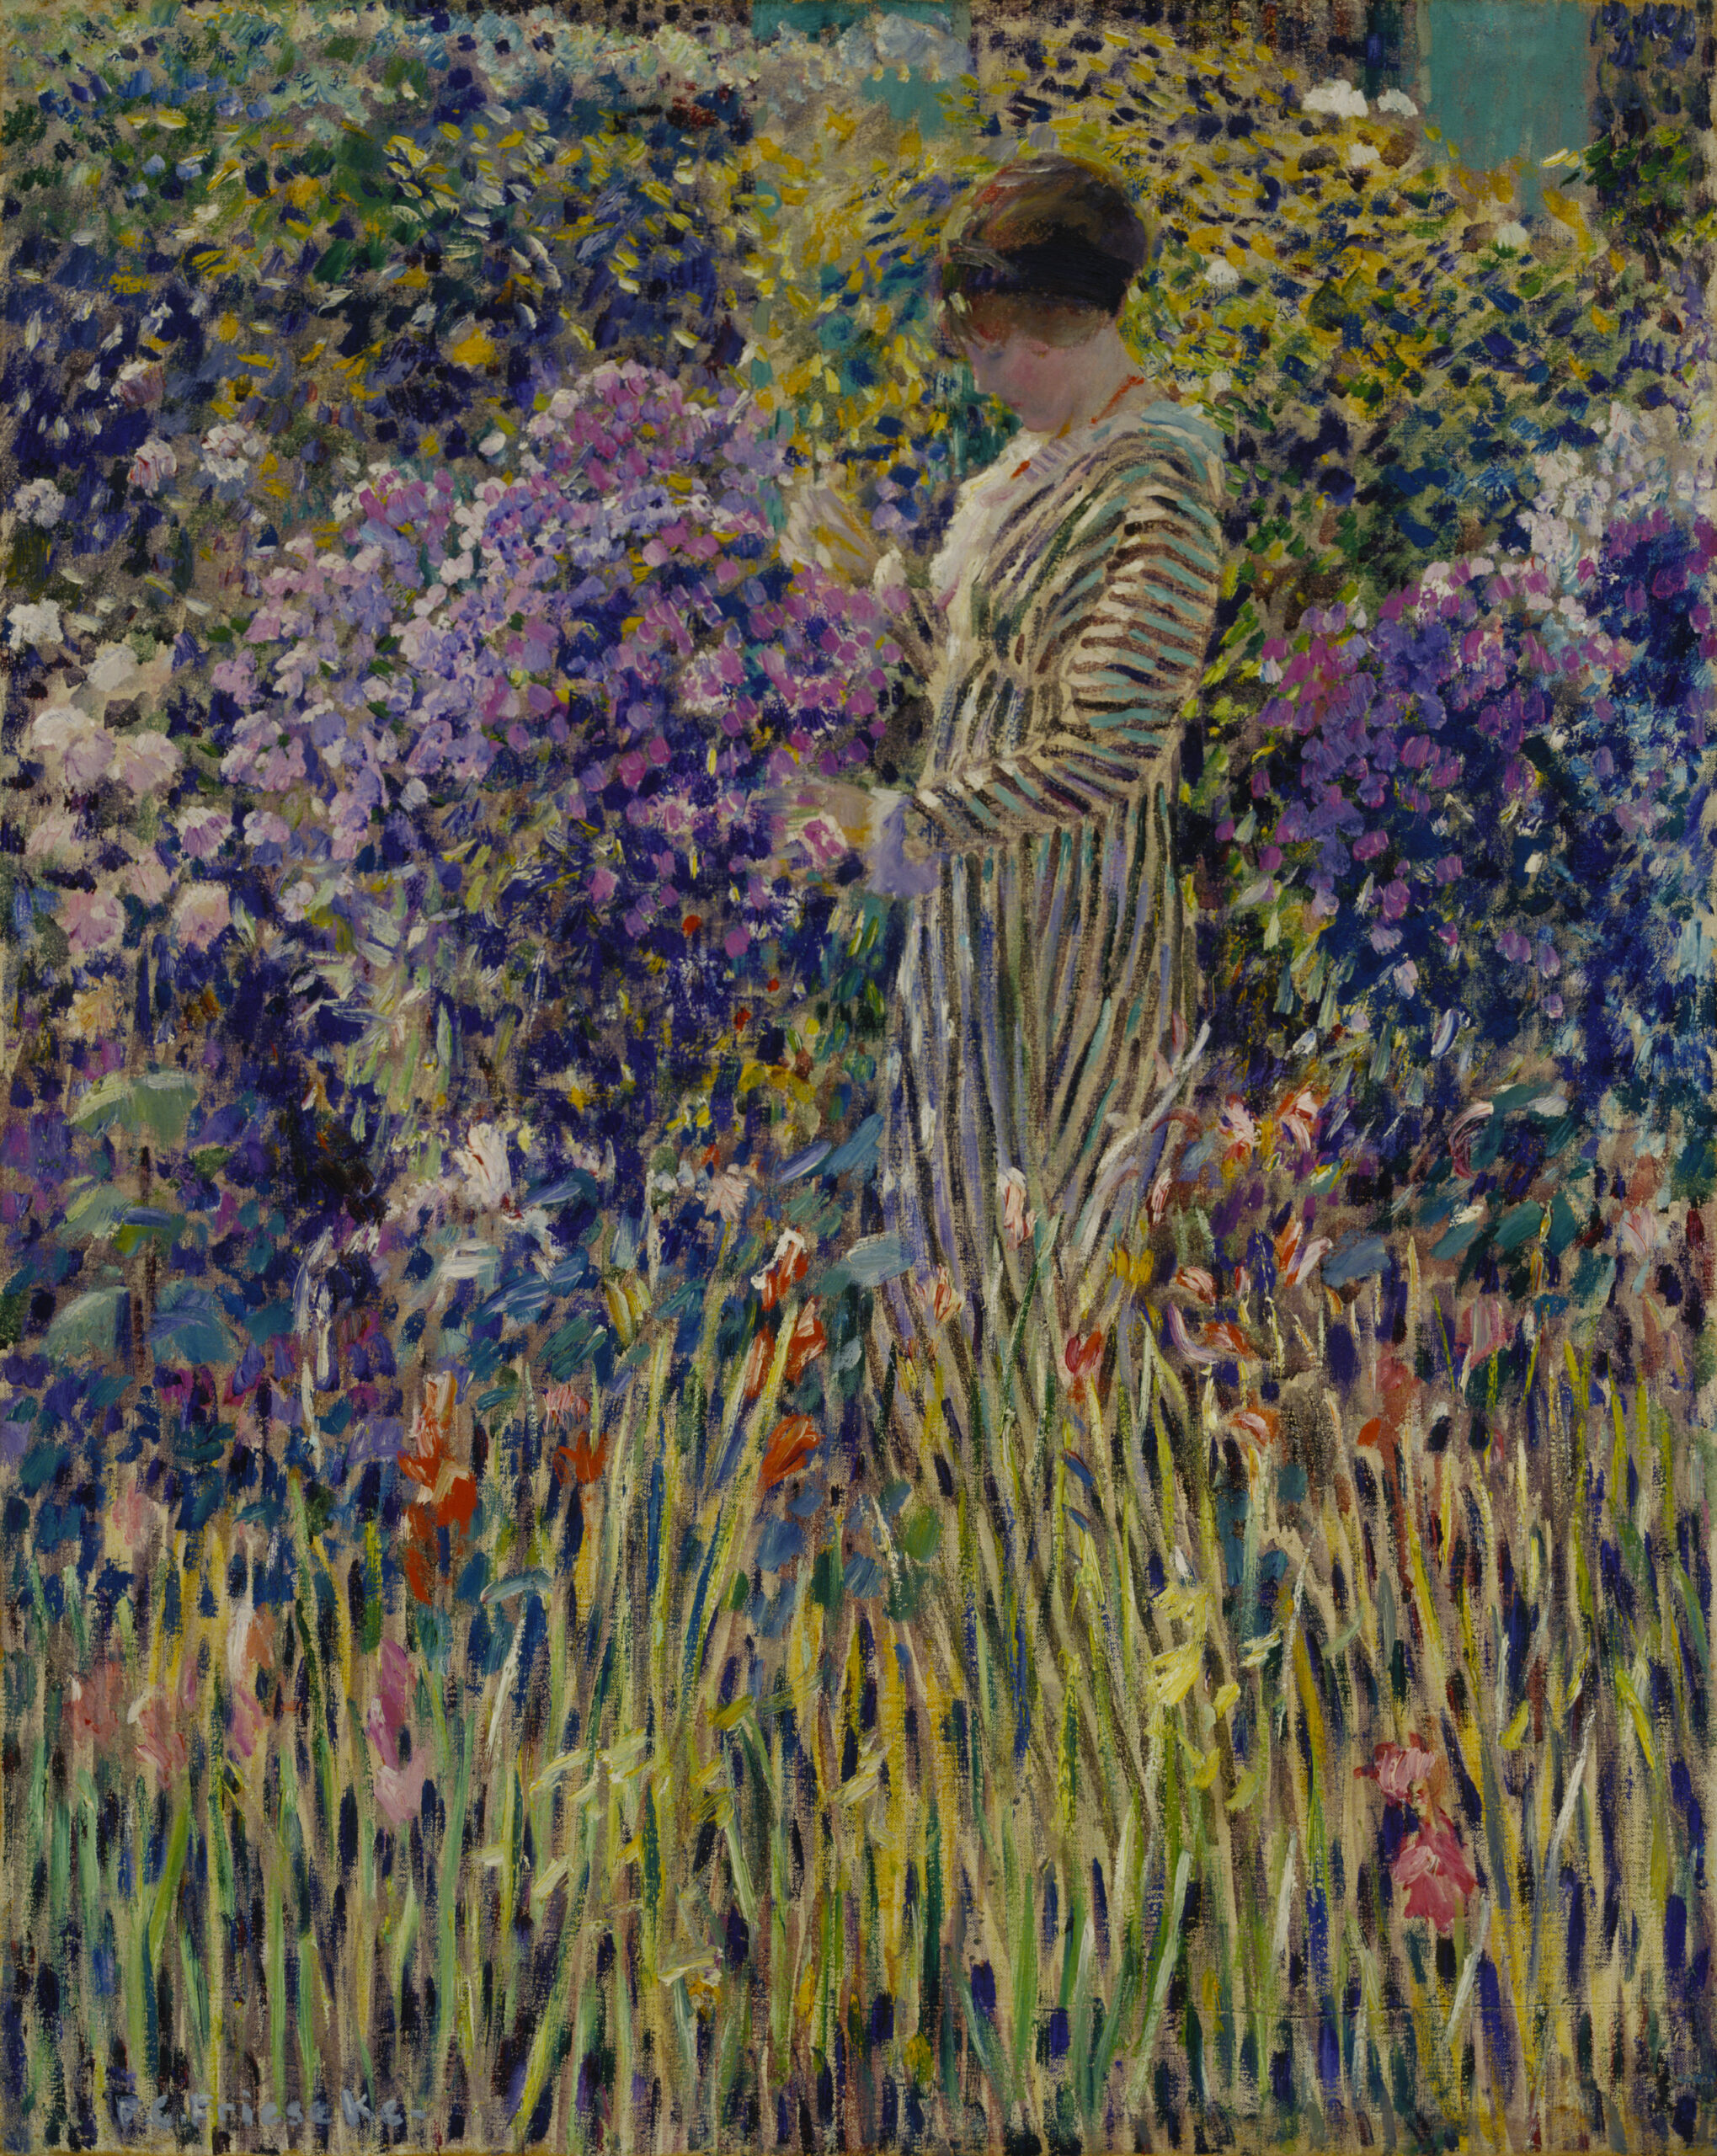 Painting of a woman standing in a garden. Her dress blends in with the flowers around her.